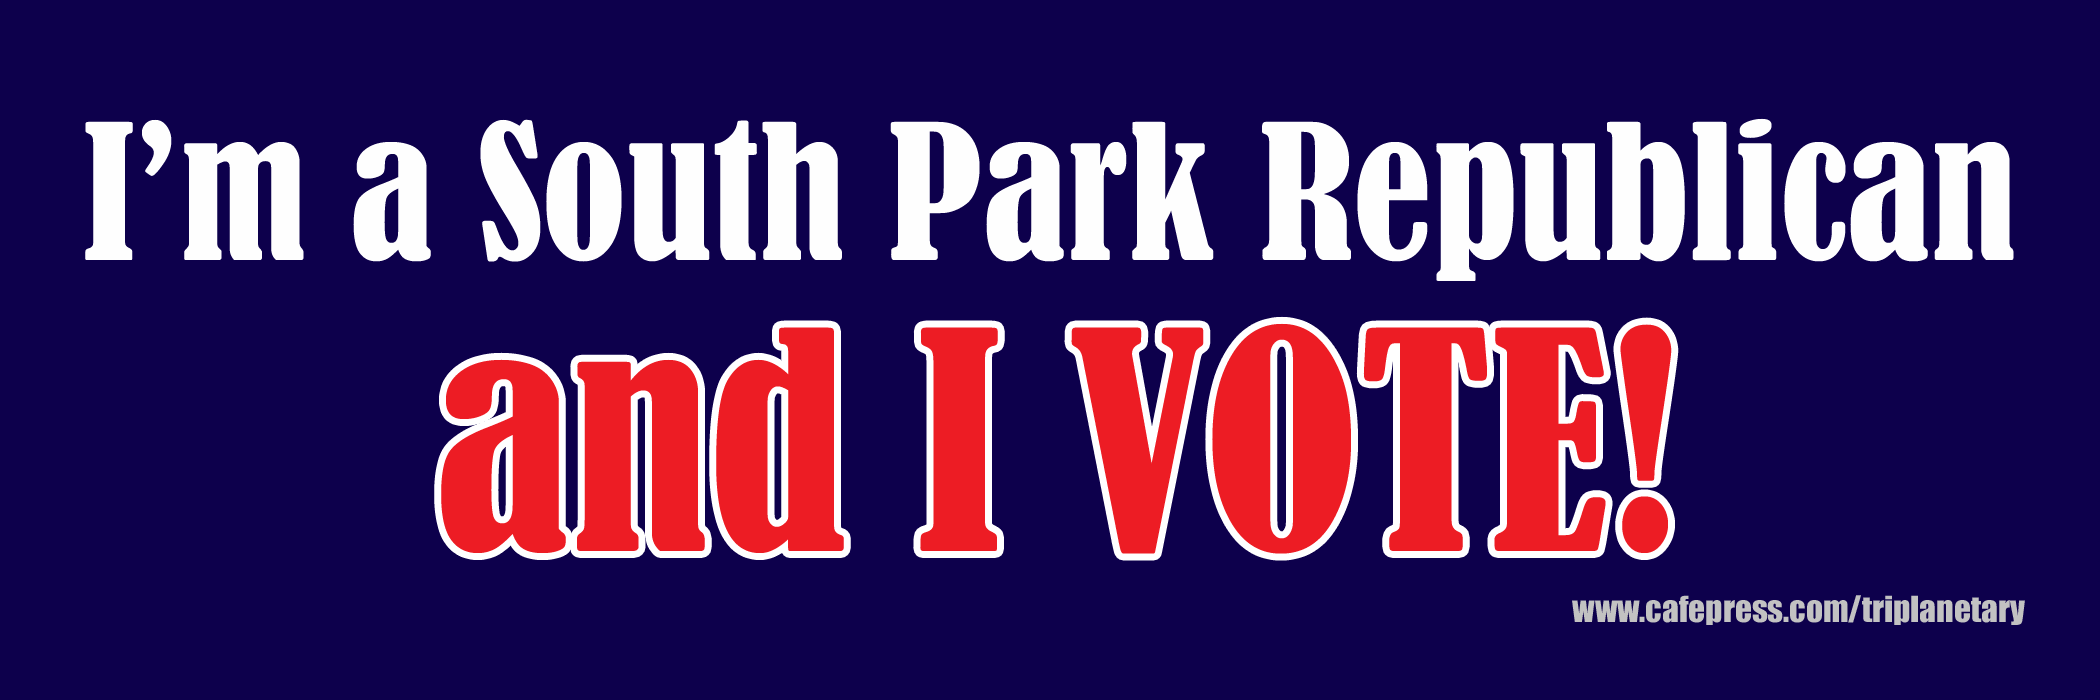 Red, white, and blue image of bumper sticker: 'I'm a South Park Republican and I VOTE!'